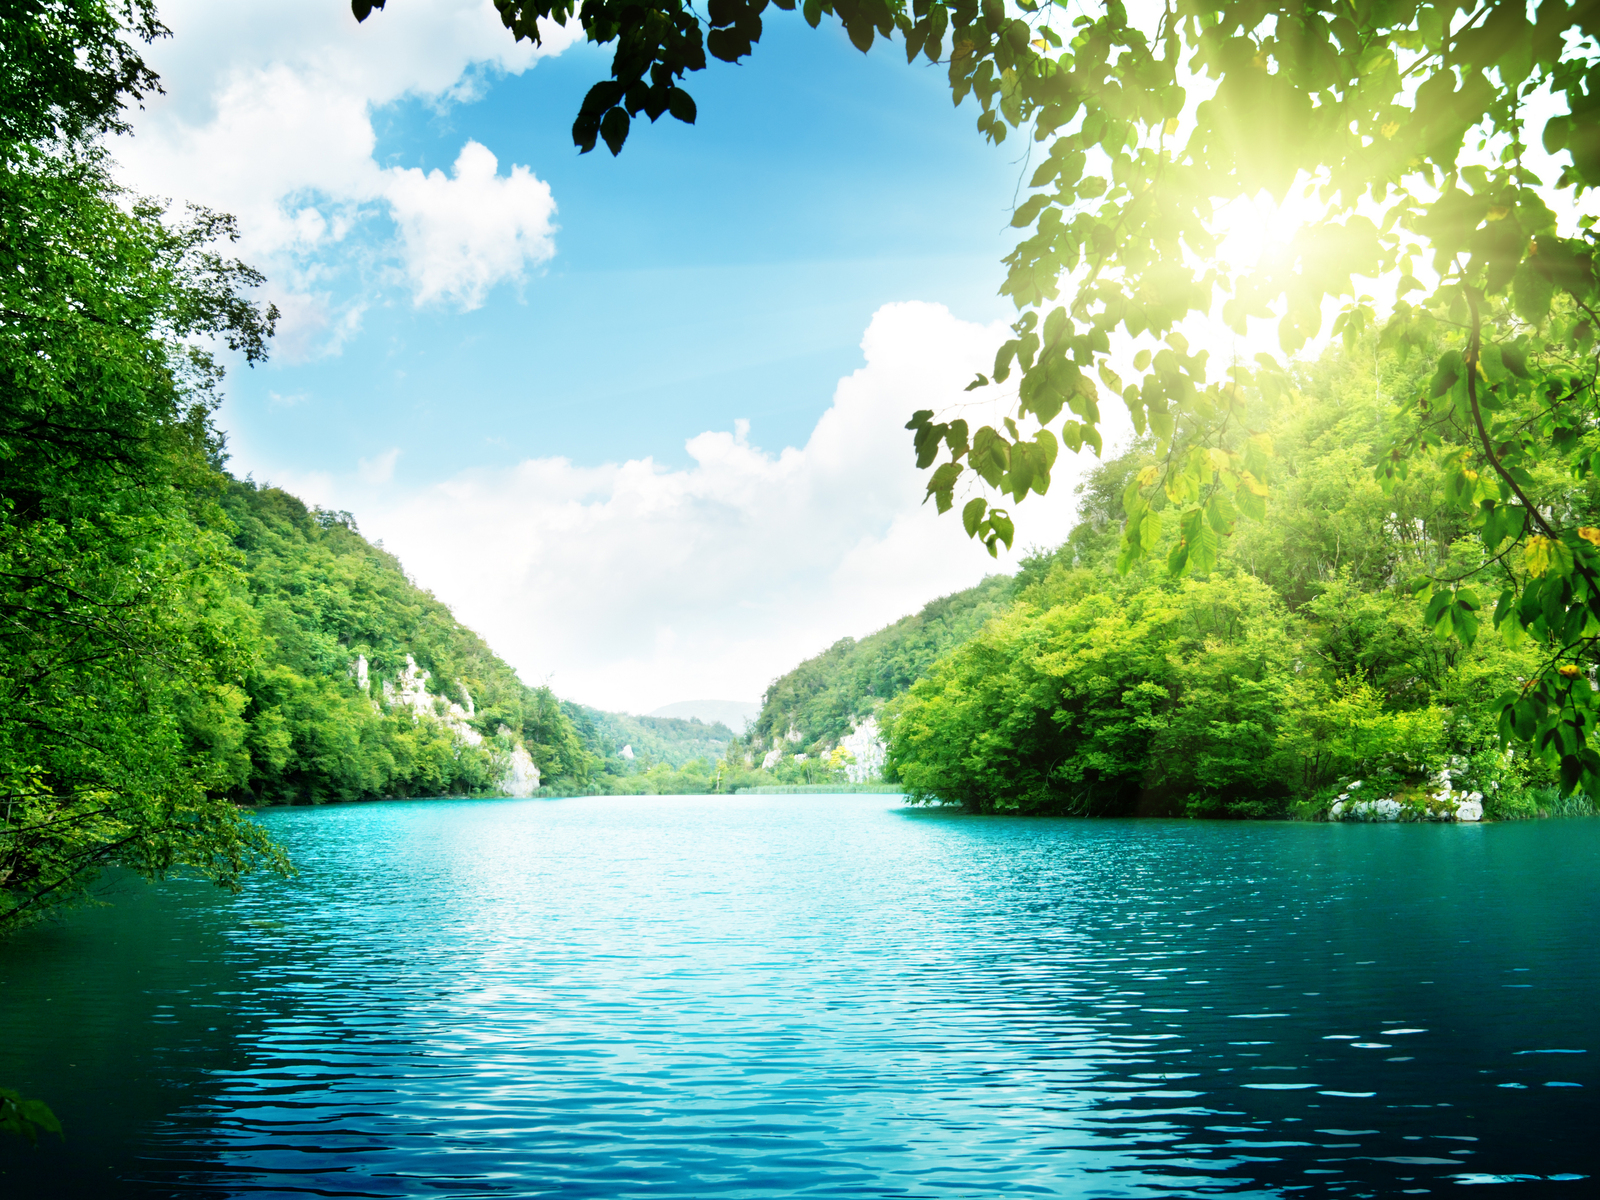 river live wallpaper,water resources,natural landscape,nature,body of water,sky